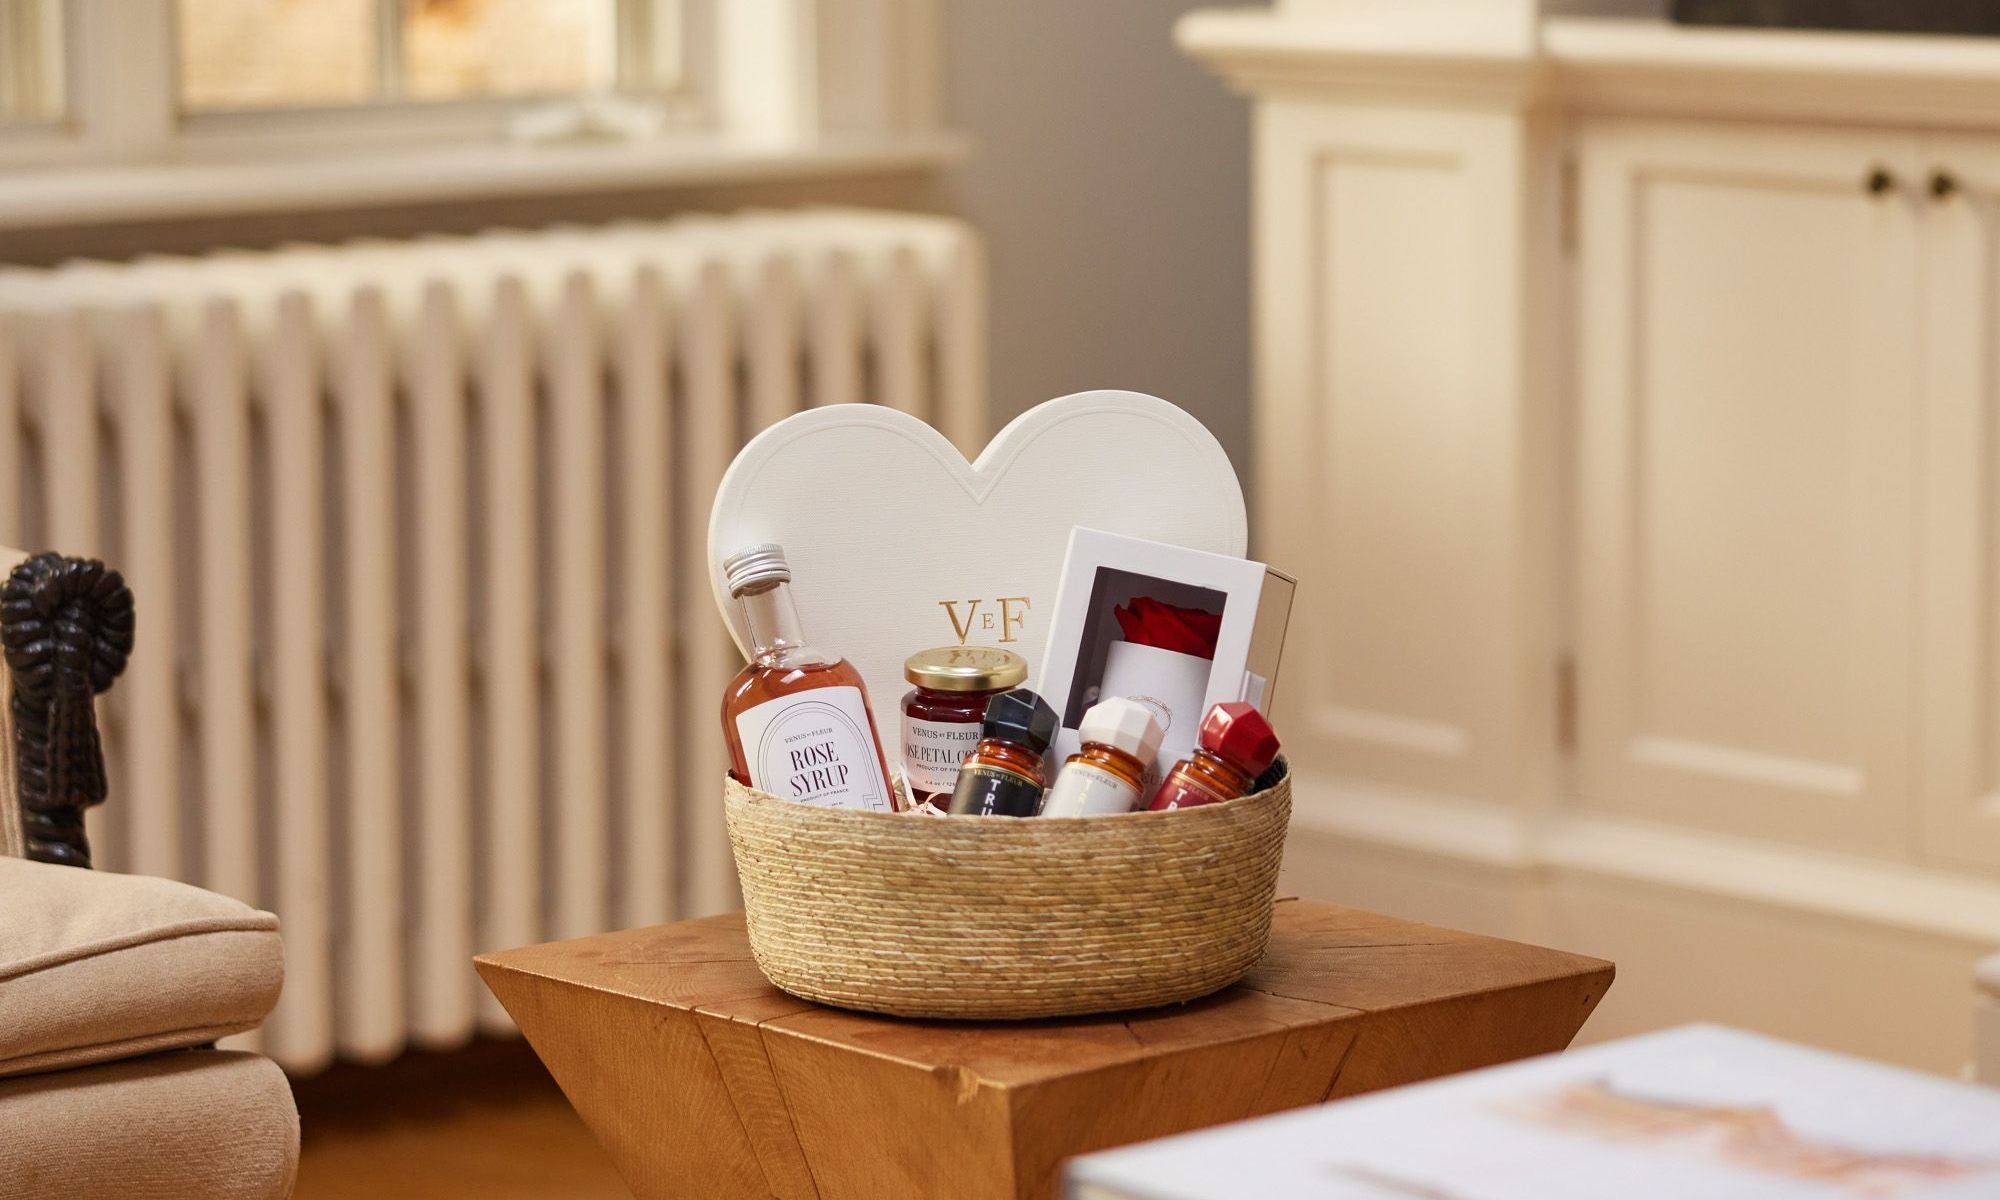 One of Luxurious Mother's Day Gift Baskets